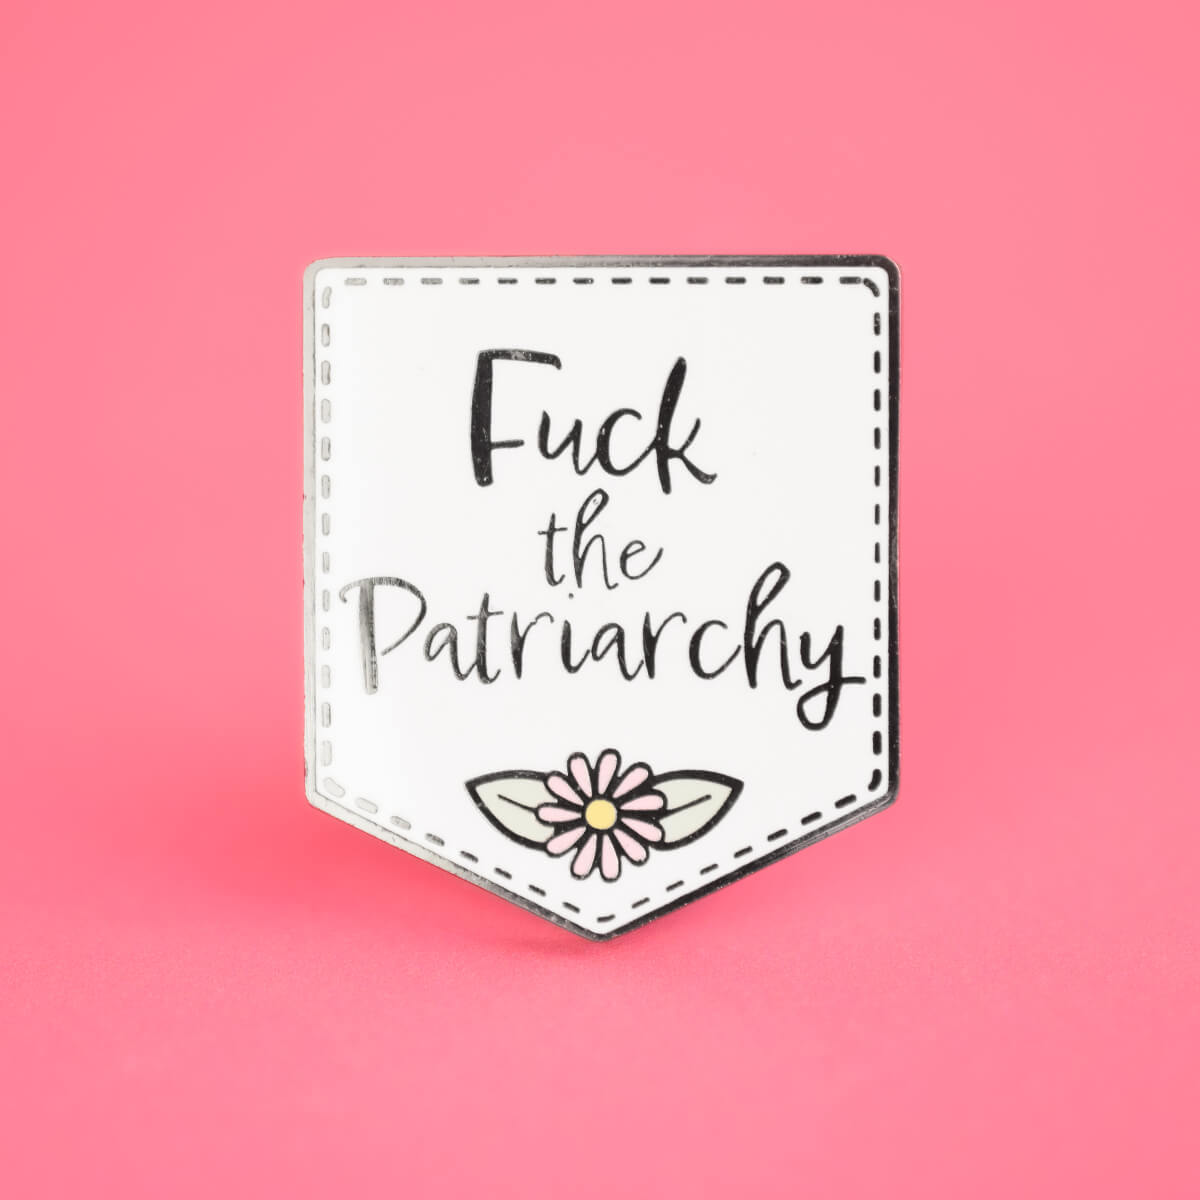 FUCK THE PATRIARCHY PENNANT ENAMEL PIN - PACK OF 5